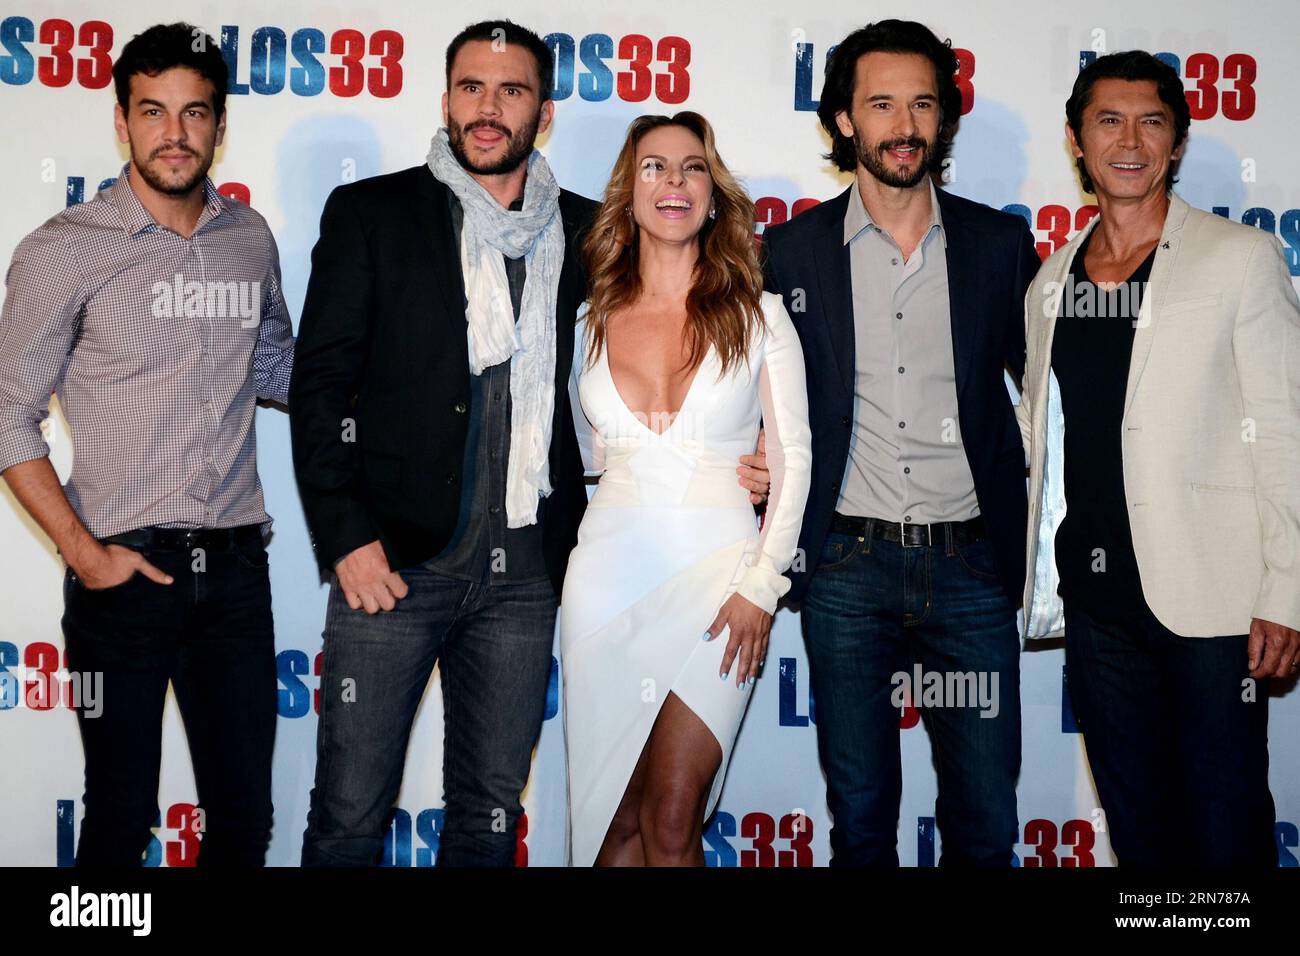 MEXICO CITY, Aug. 24, 2015 -- Cast members of movie The 33 Mario Casas, Juan Pablo Raba, Kate del Castillo, Rodrigo Santoro and Lou Diamond Phillips (L to R) pose for a photo during a press conference in Mexico City, Mexico, on Aug. 24, 2015. The movie is based on true event, the story of 33 Chilean miners who were trapped 69 days after the collapse of the San Jose mine in 2010. Francisco Morales/Damm photo) (rtg) MEXICO-MEXICO CITY-MOVIE-THE 33 STR PUBLICATIONxNOTxINxCHN   Mexico City Aug 24 2015 Cast Members of Movie The 33 Mario Casas Juan Pablo Raba Kate Del Castillo Rodrigo Santoro and Lo Stock Photo